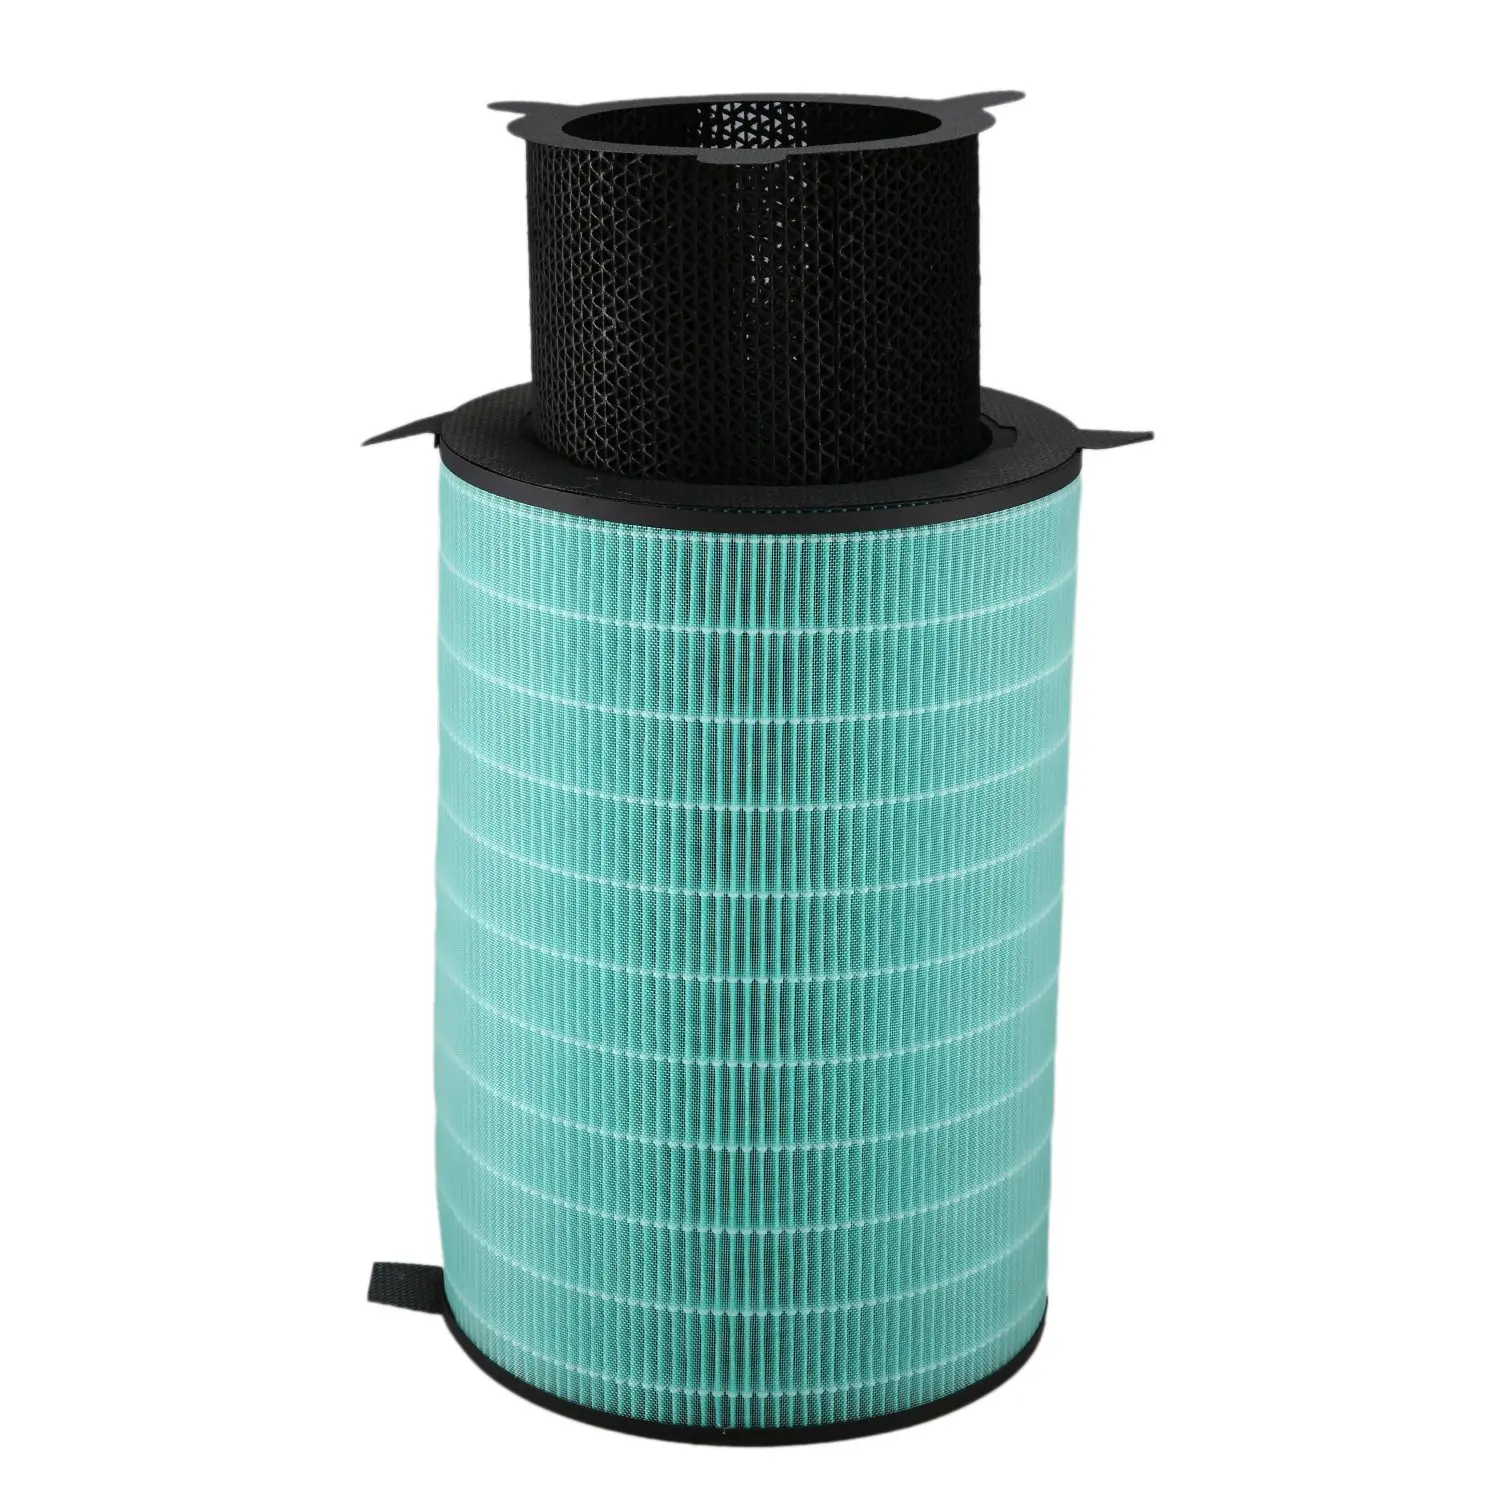 for-balmuda-ejts210-ejt1100sd-ejt1180-1380-1390-series-air-purifier-cylindrical-hepa-filter